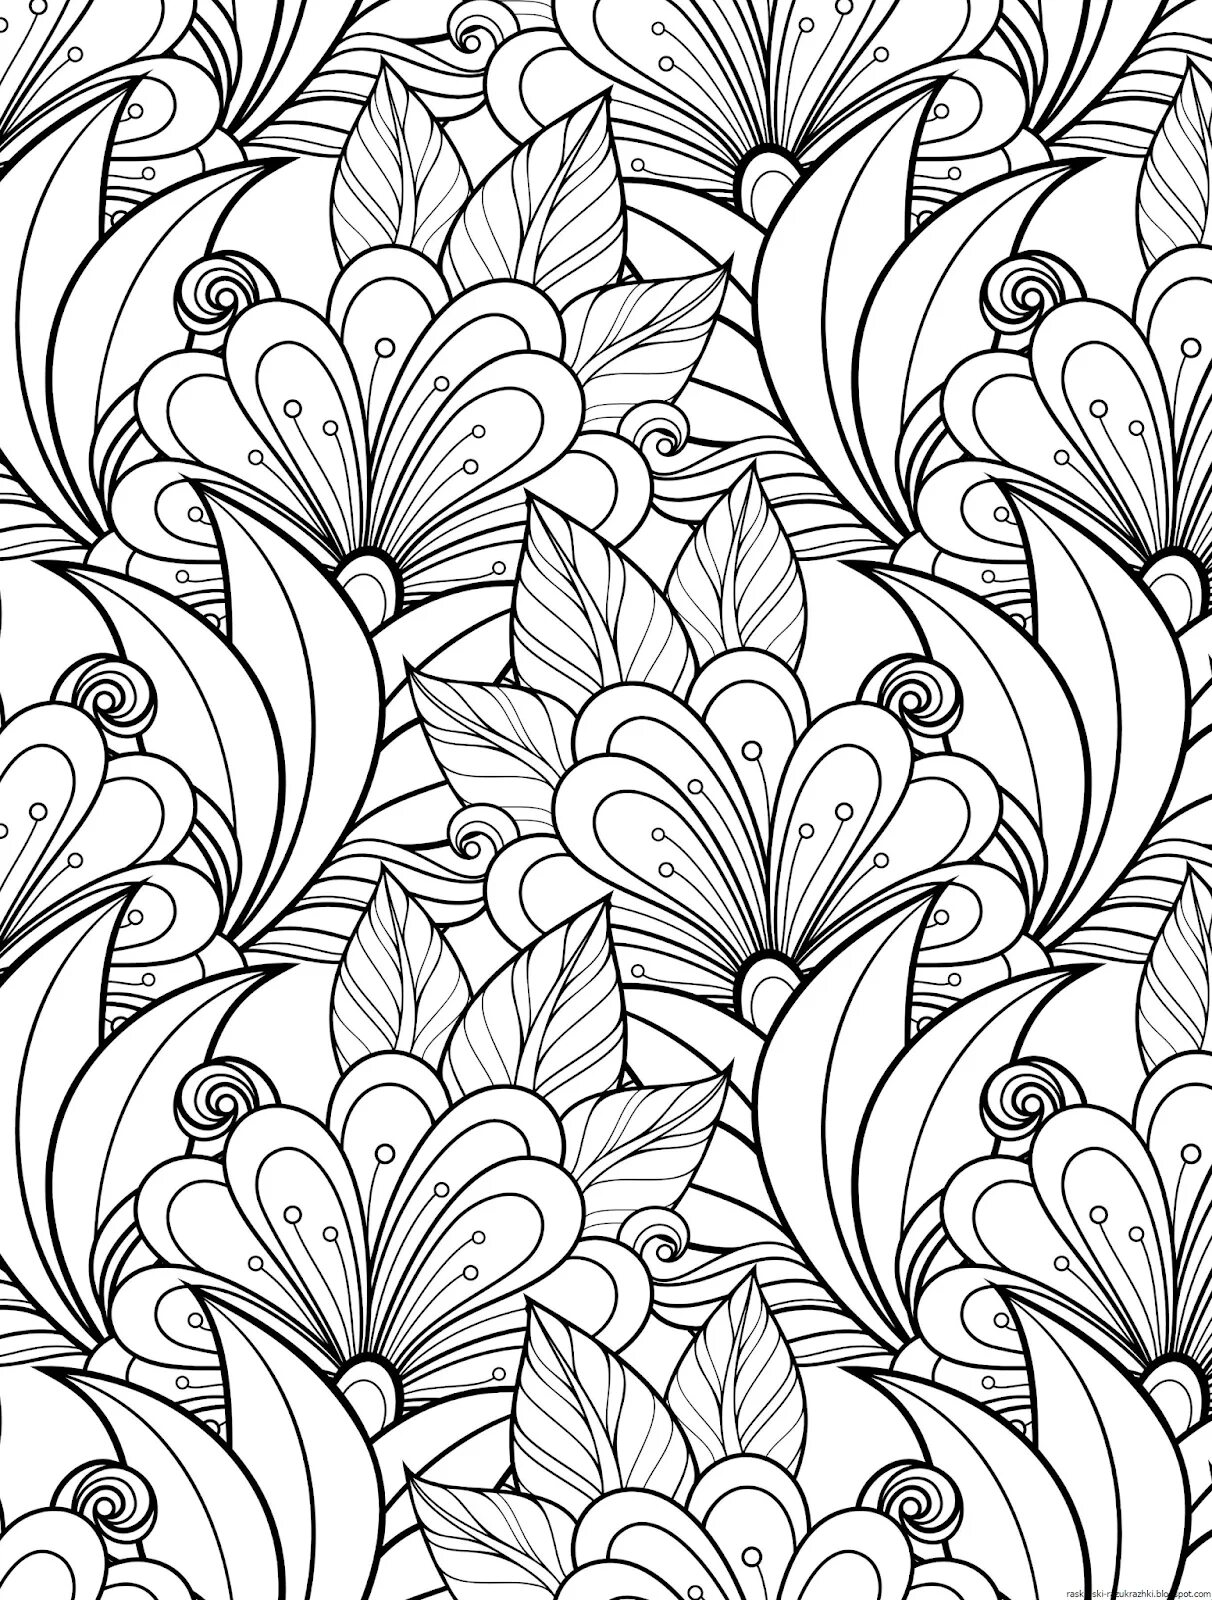 Generous adult coloring book, large